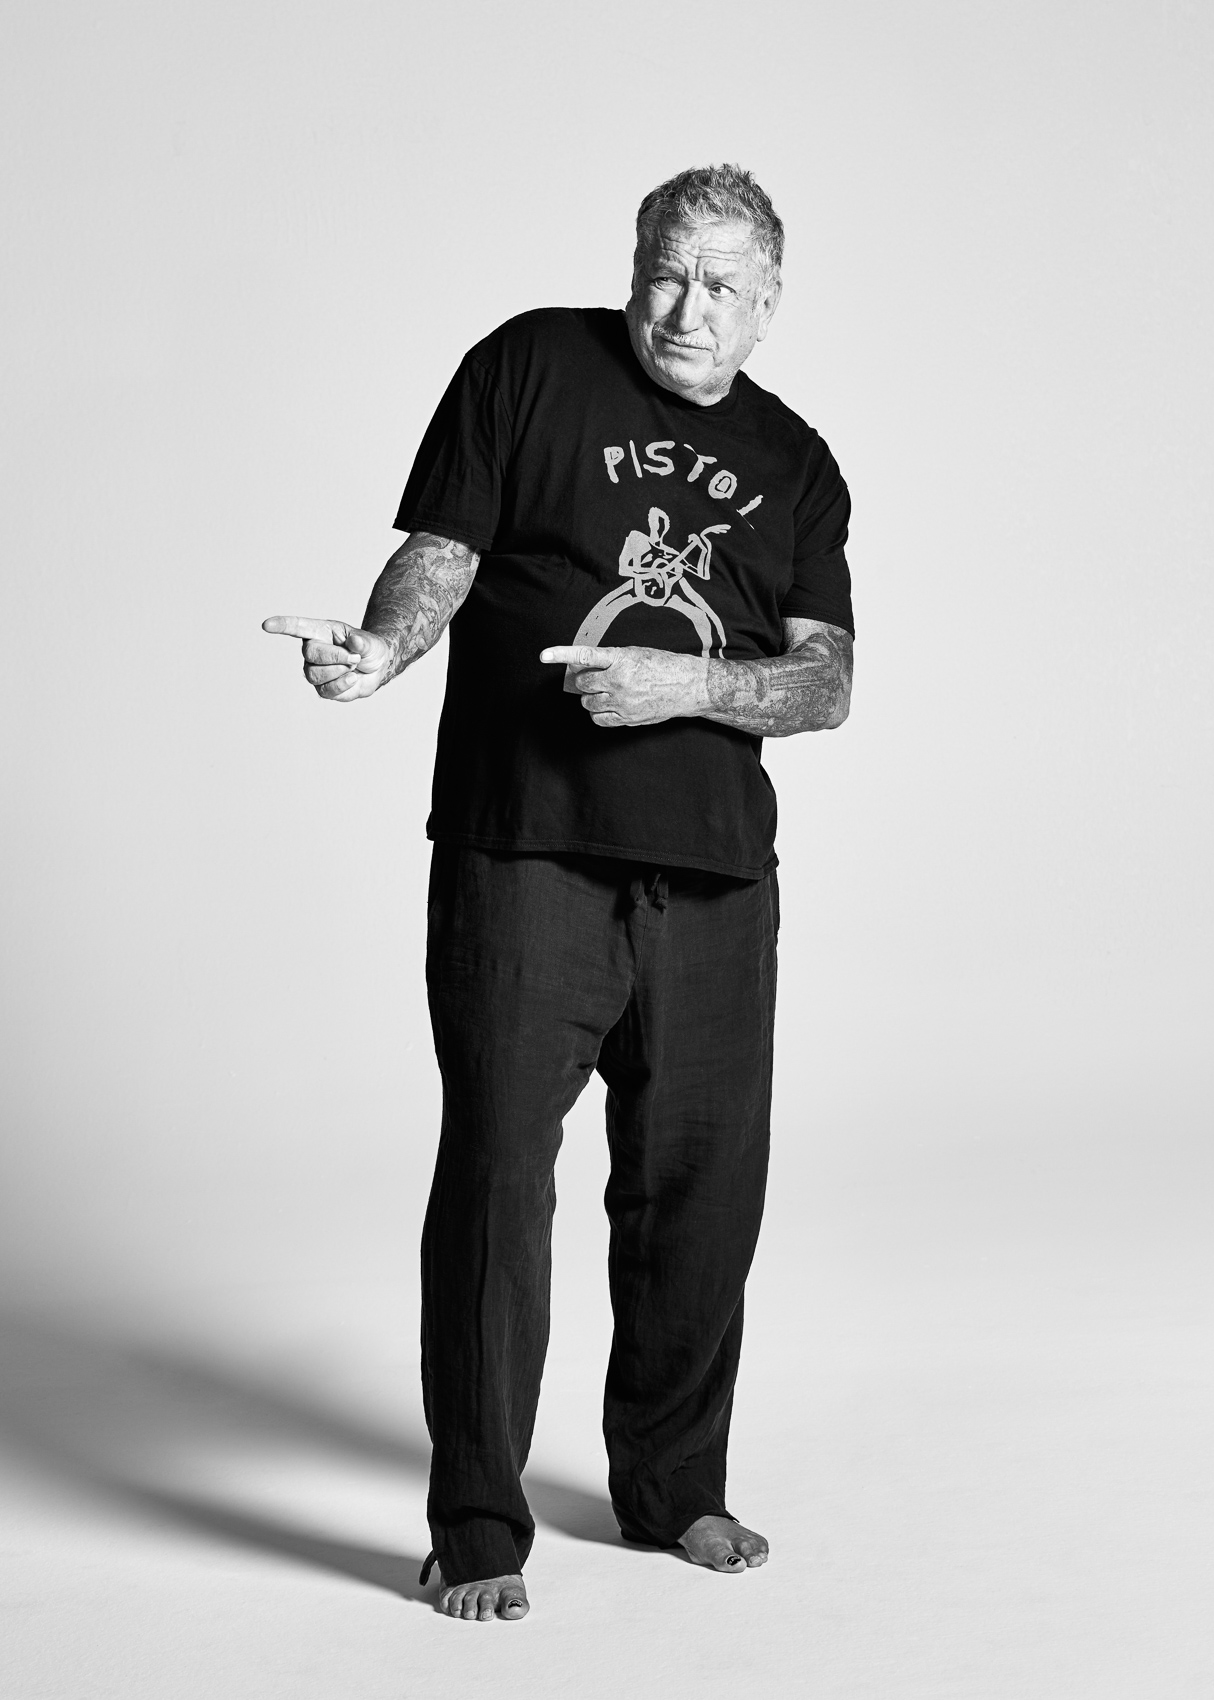 Steve Jones, guitarist from the Sex Pistols | Los Angeles | Editorial and Commercial Photographer Patrick Strattner